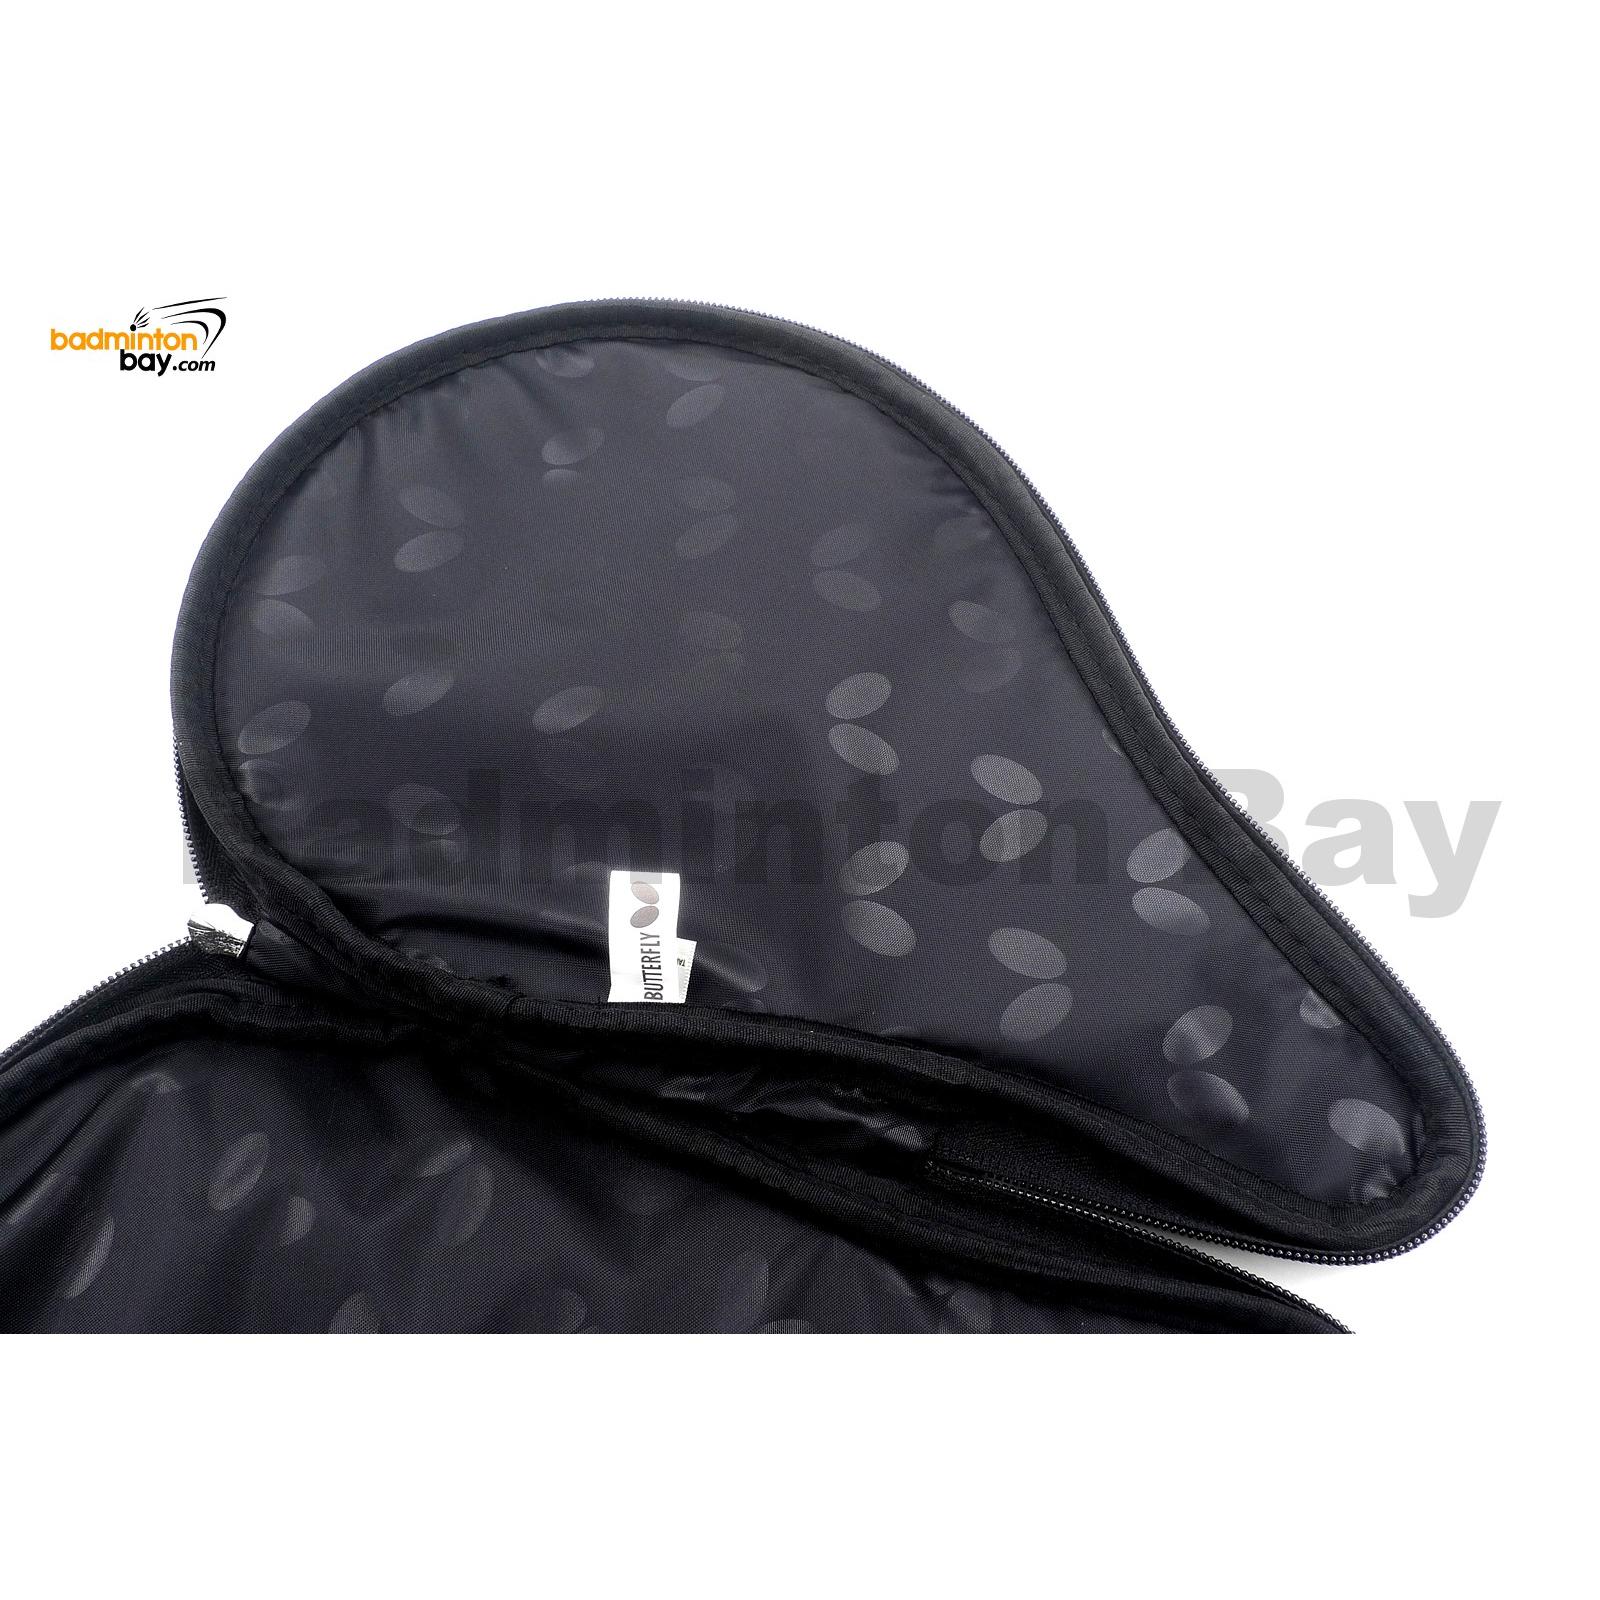 Butterfly Table tennis bag Logar case racket storage Black 63070 from Japan  NEW